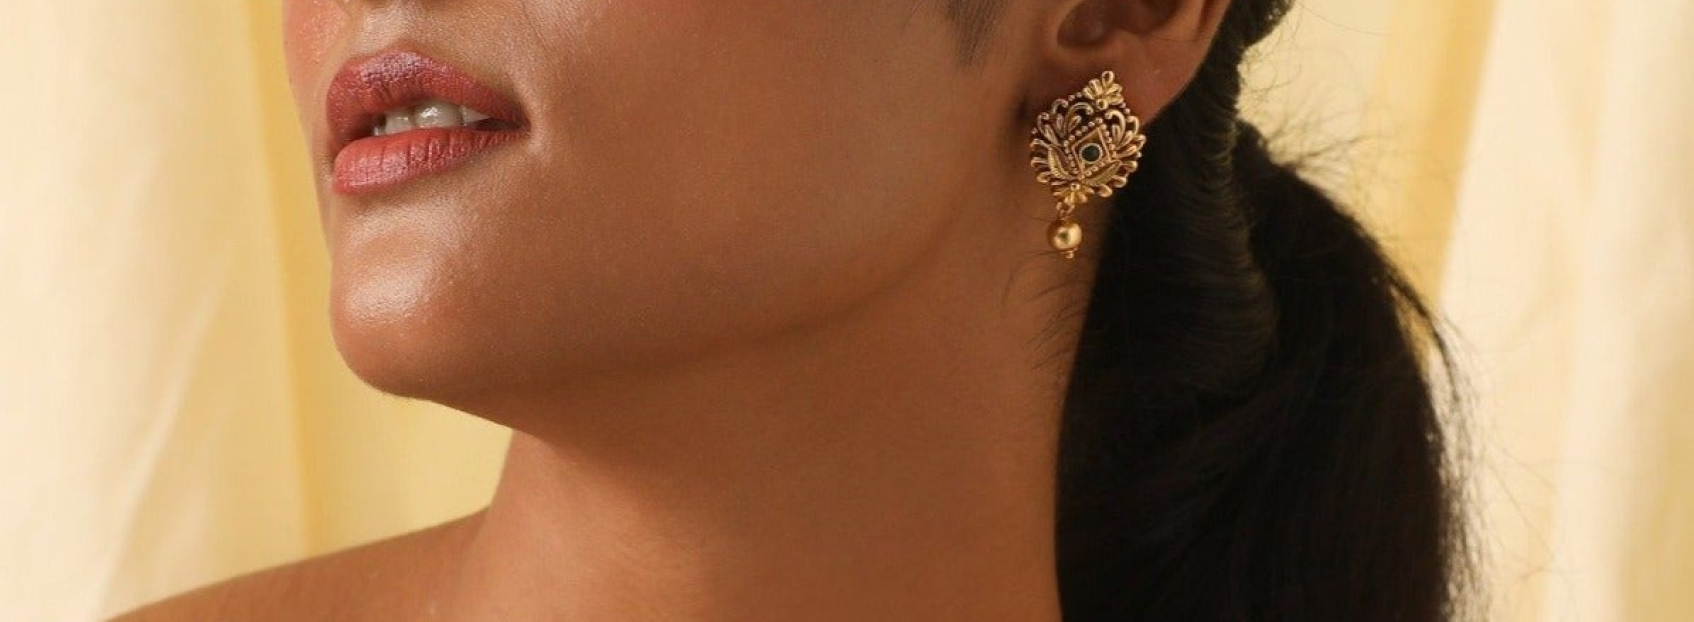 model wearing golden stud earrings with a diamond center and dangling ball